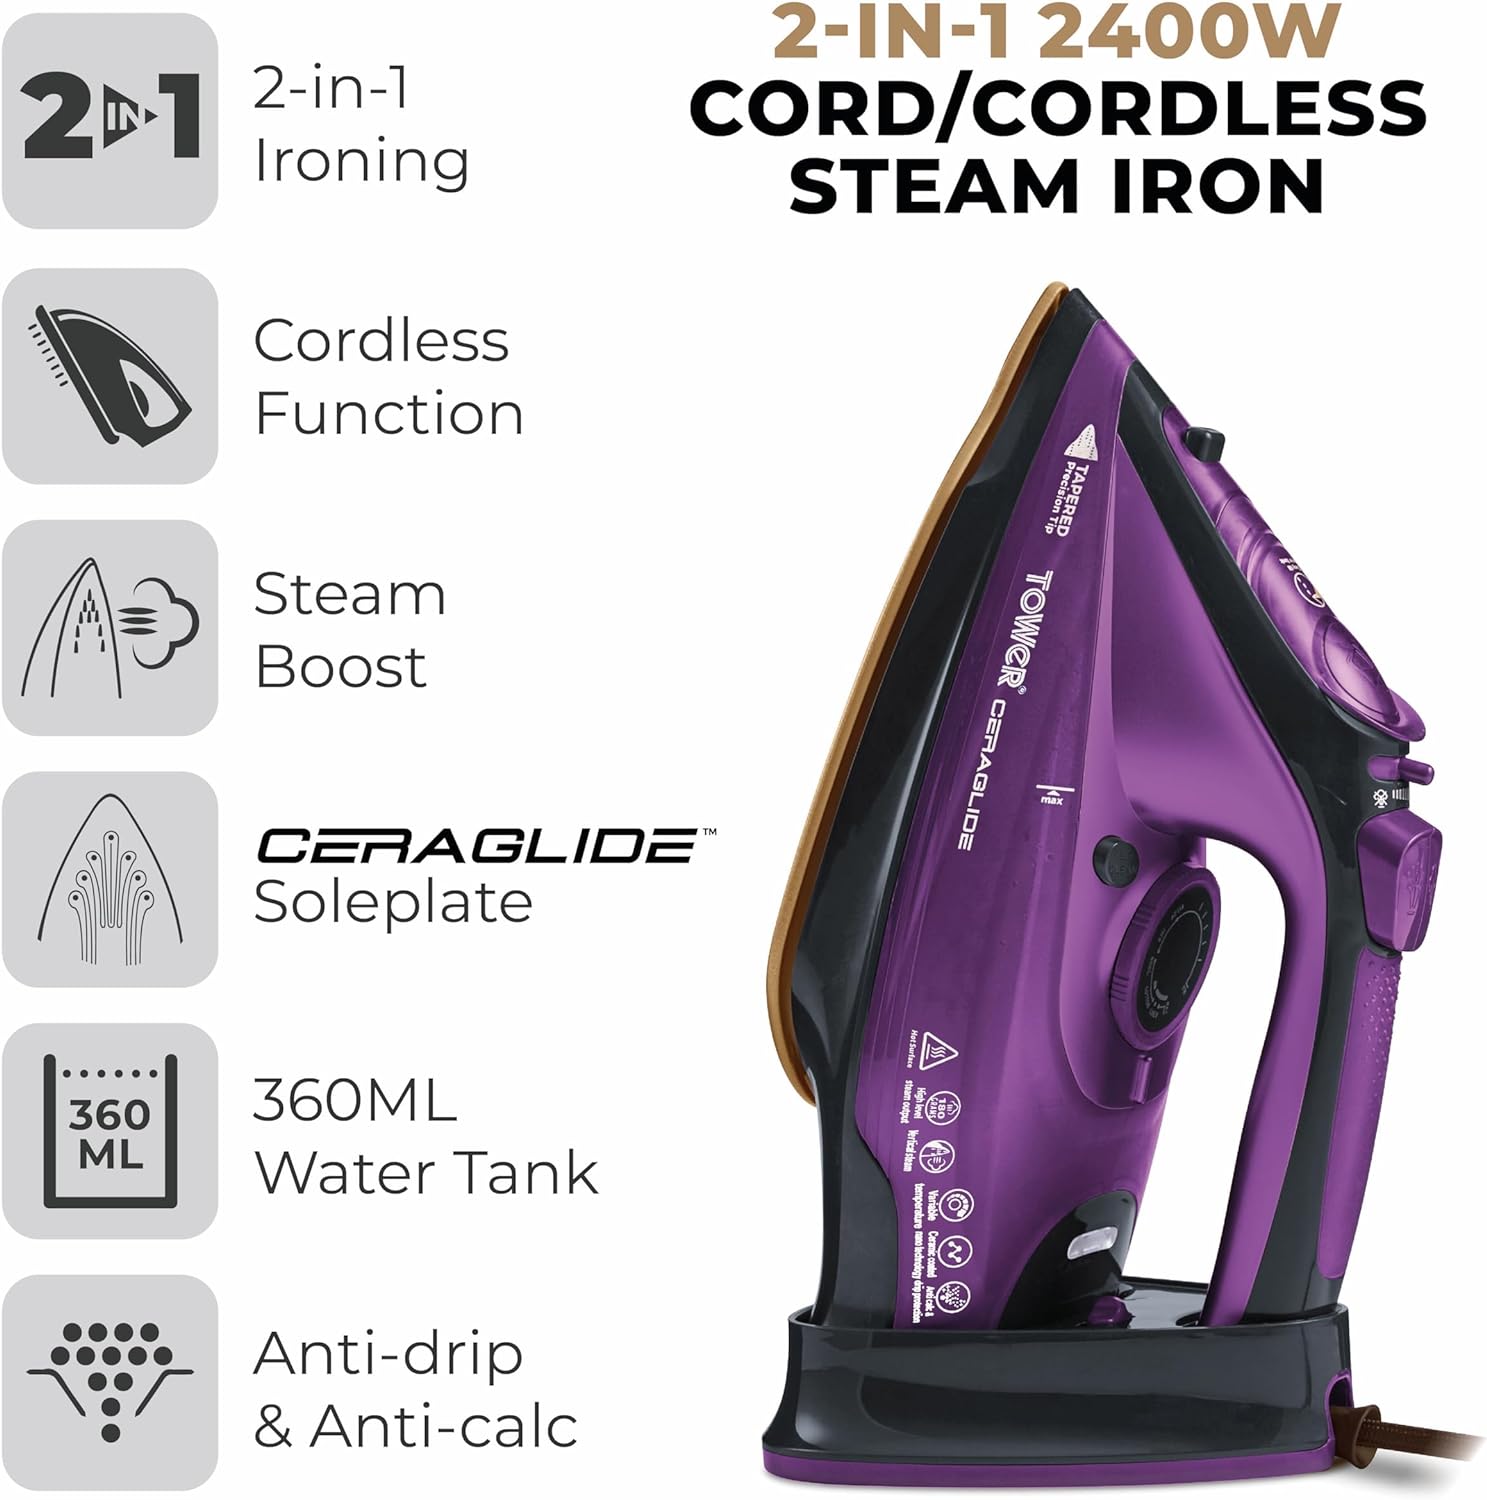 Tower T22008 CeraGlide Cordless Steam Iron with Ceramic Soleplate and Variable Steam Function, 2400 W